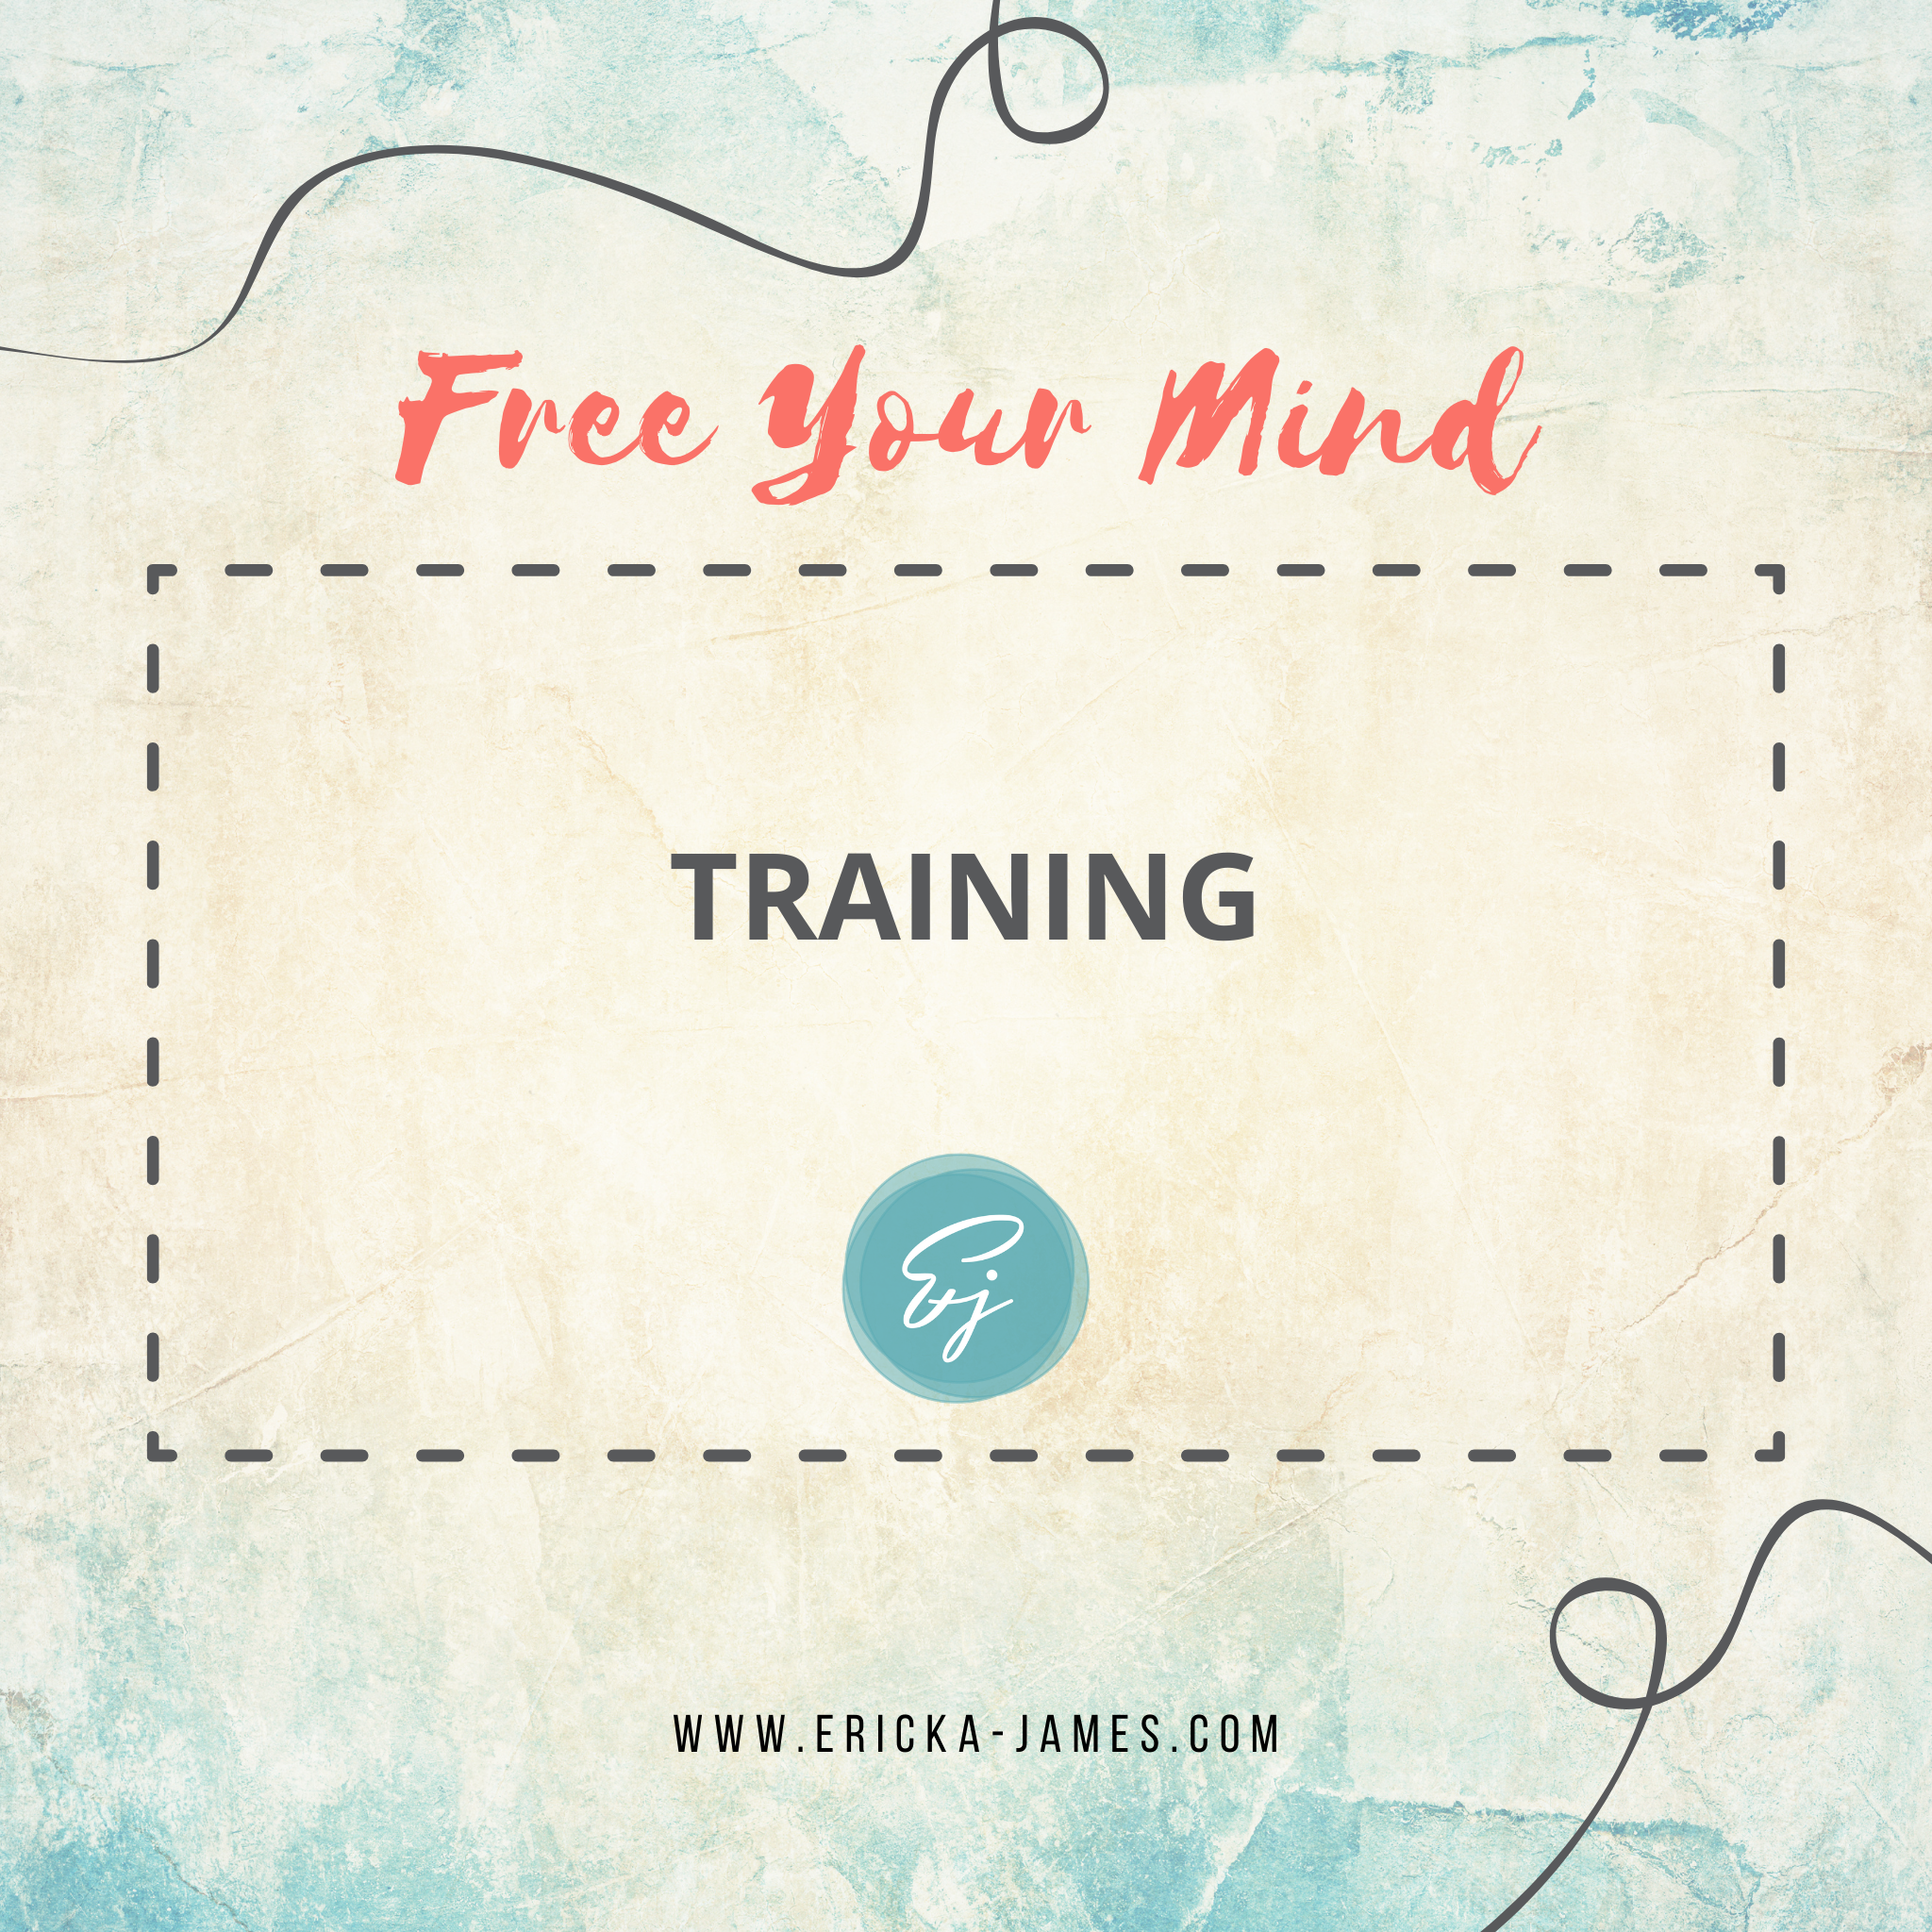 Free Your Mind class